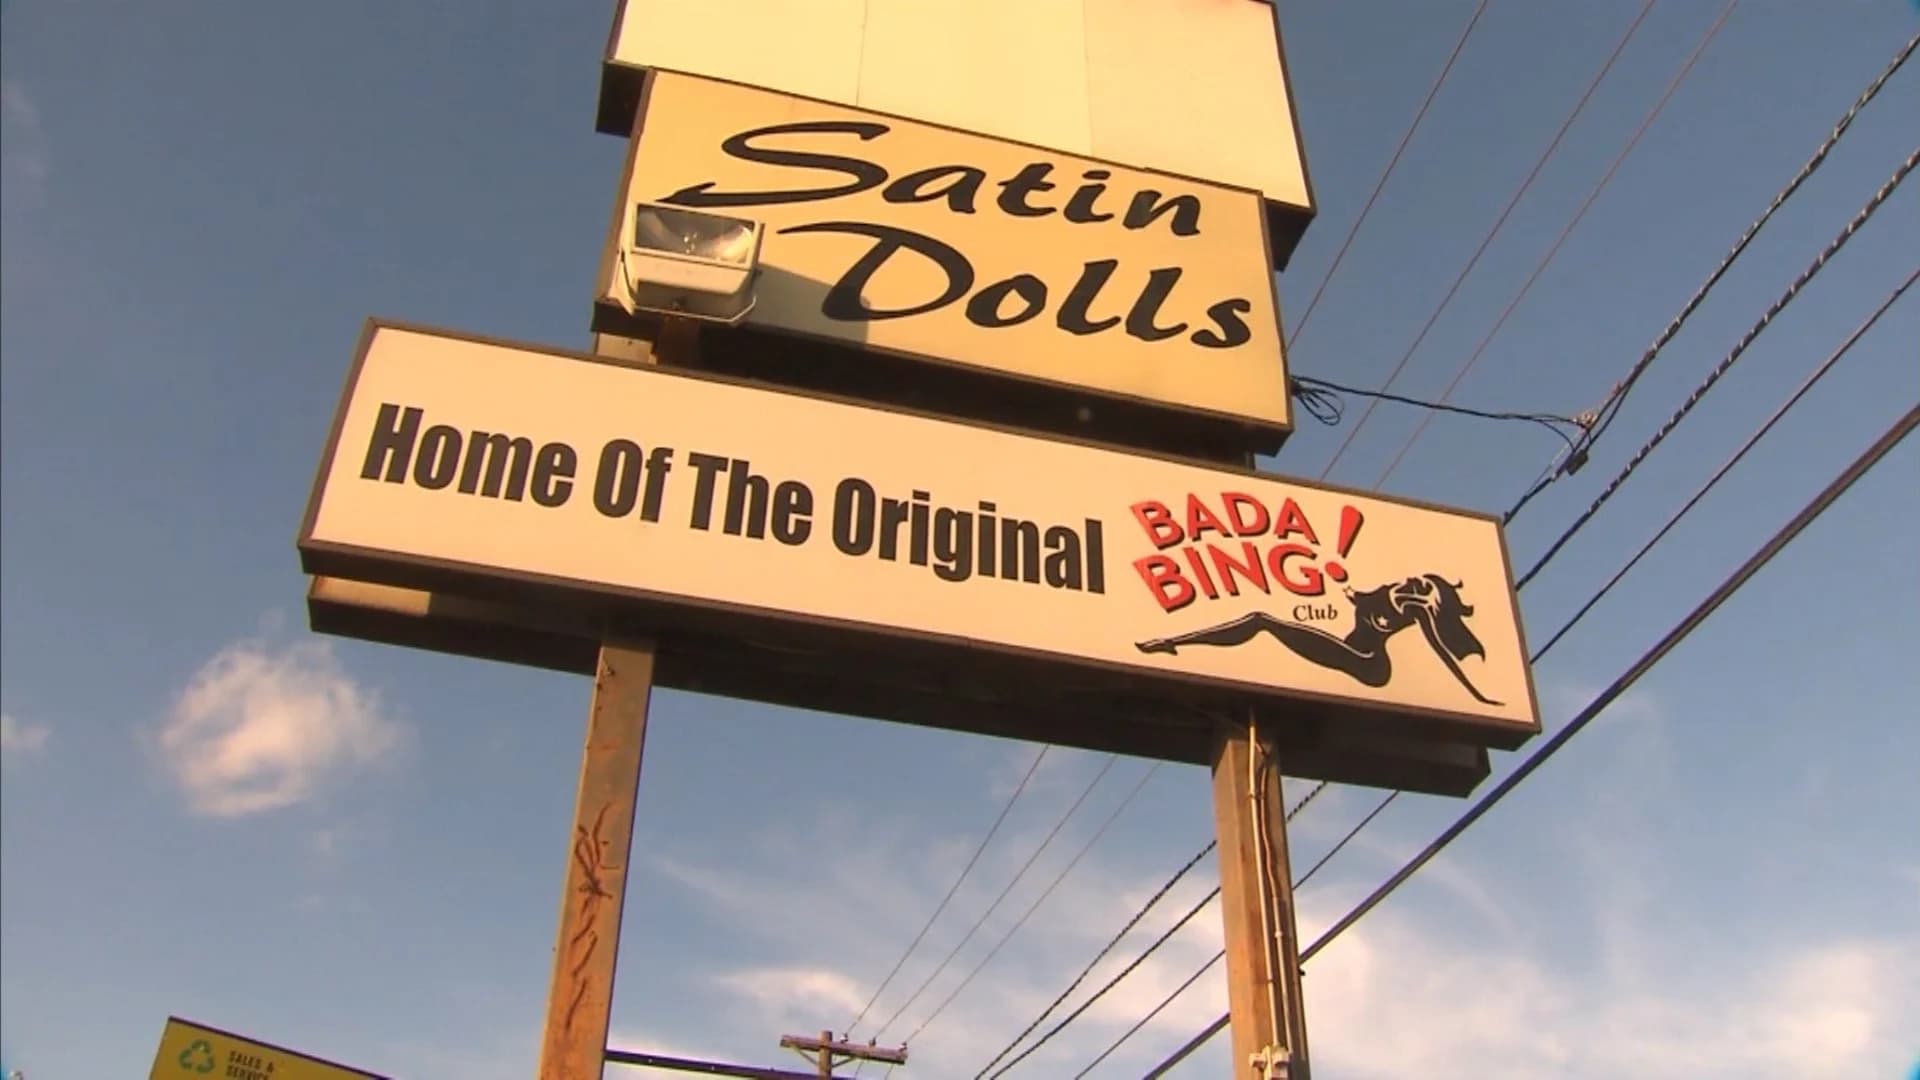 New Jersey landmarks made famous by 'The Sopranos'